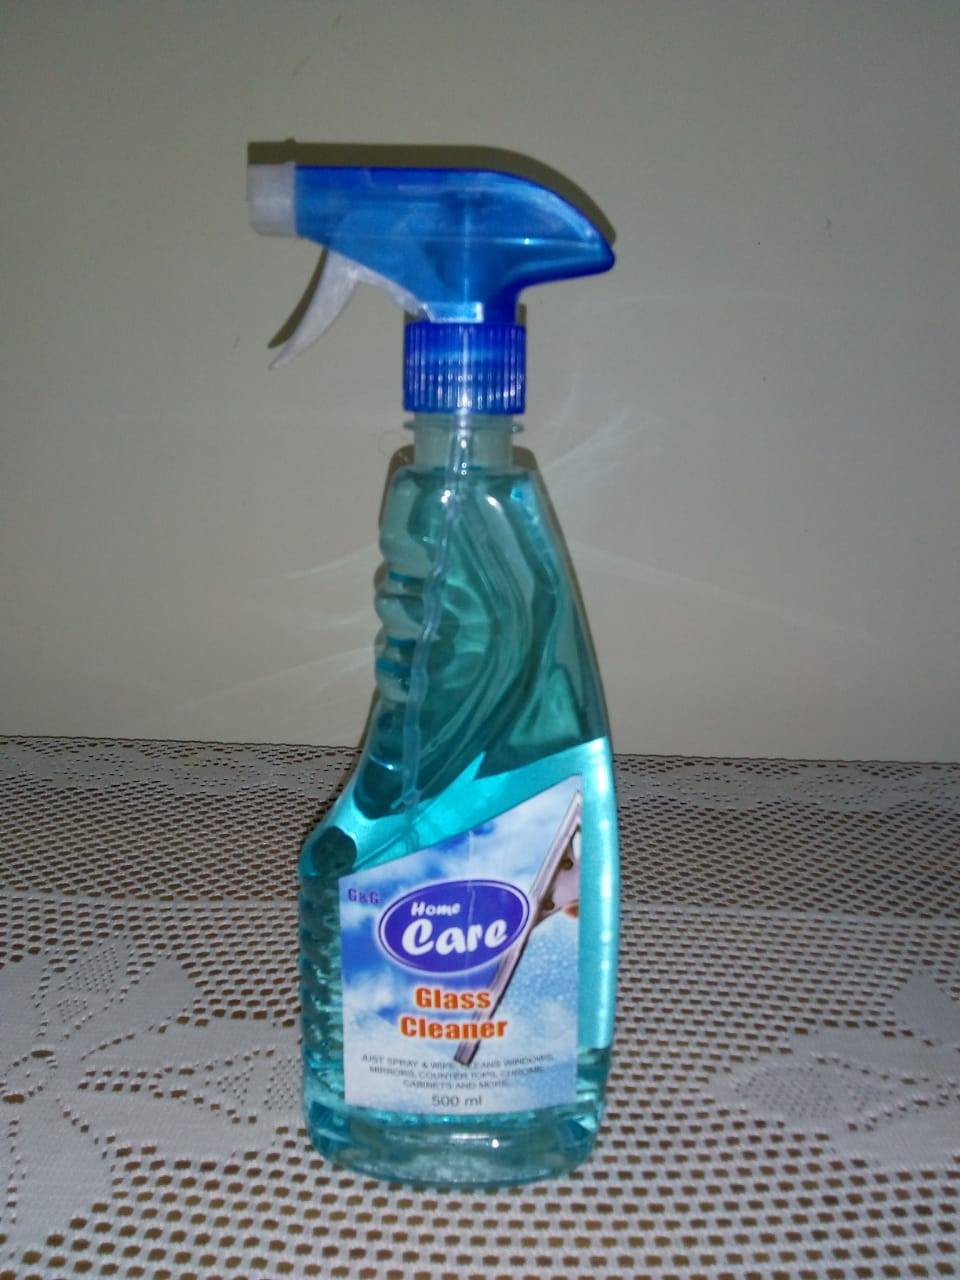 Glass Cleaner from G&G Hygiene and Cleaning Products